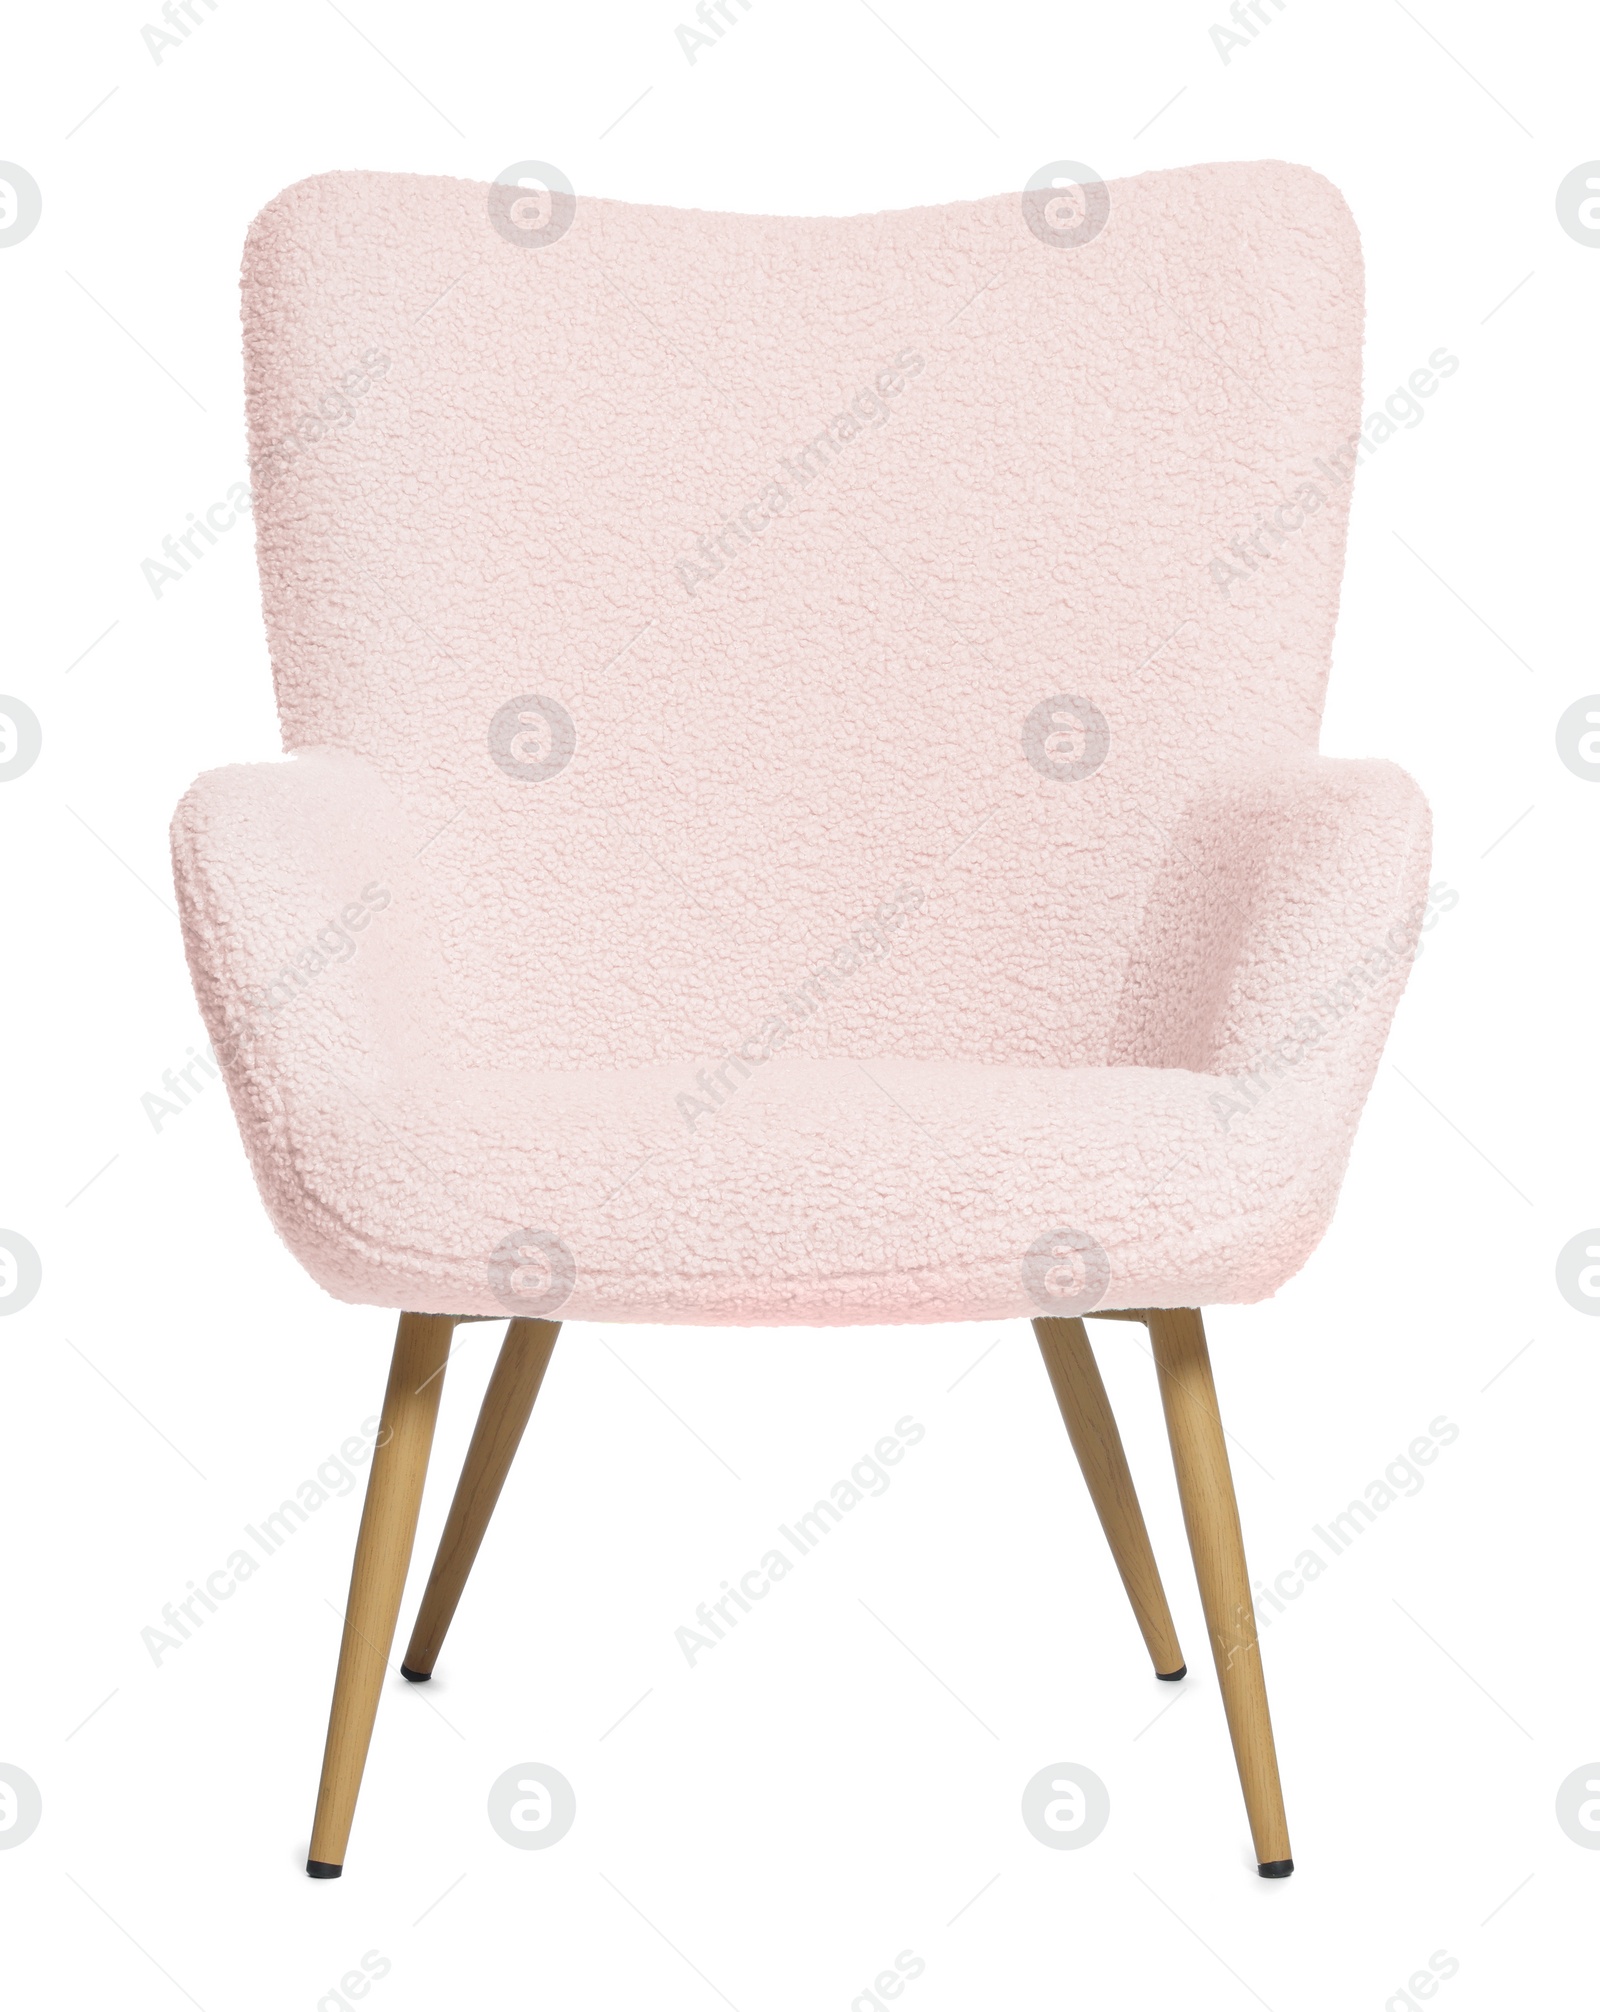 Image of One comfortable misty rose color armchair isolated on white